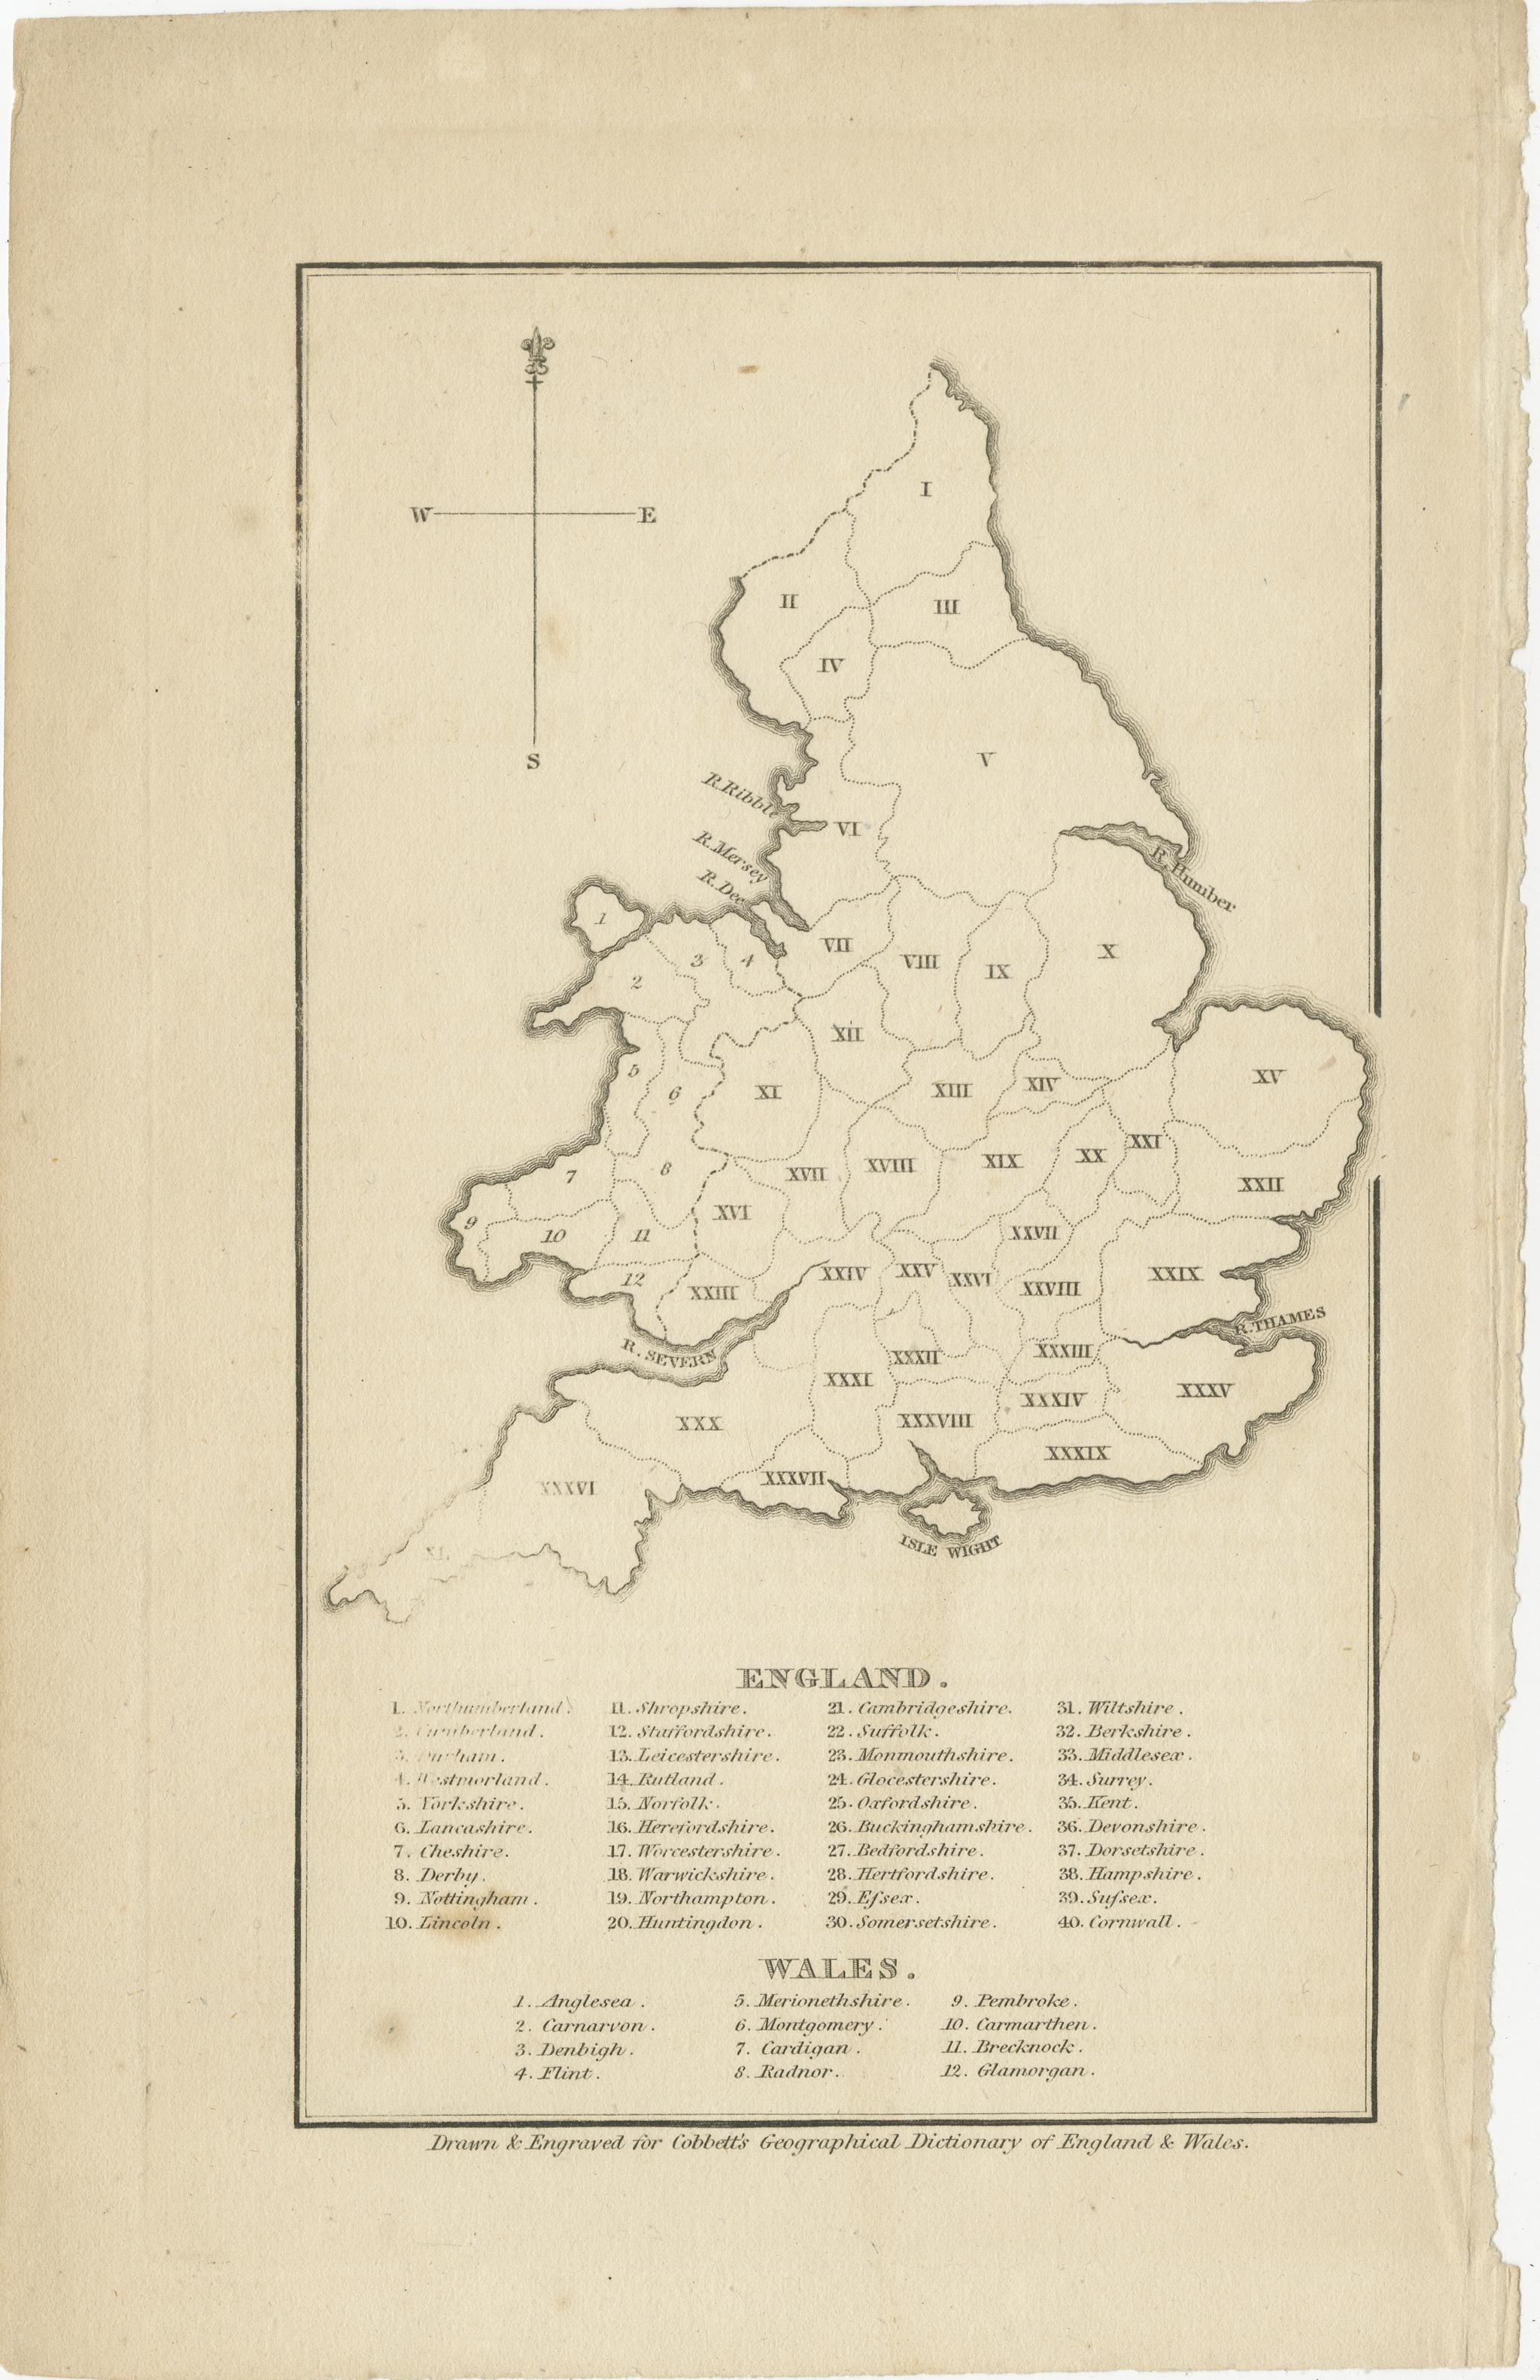 Untitled original antique map of England and Wales. Drawn & Engraved for Cobbetts 'Geographical Dictionary of England & Wales'. Published by William Cobbett, 1832.